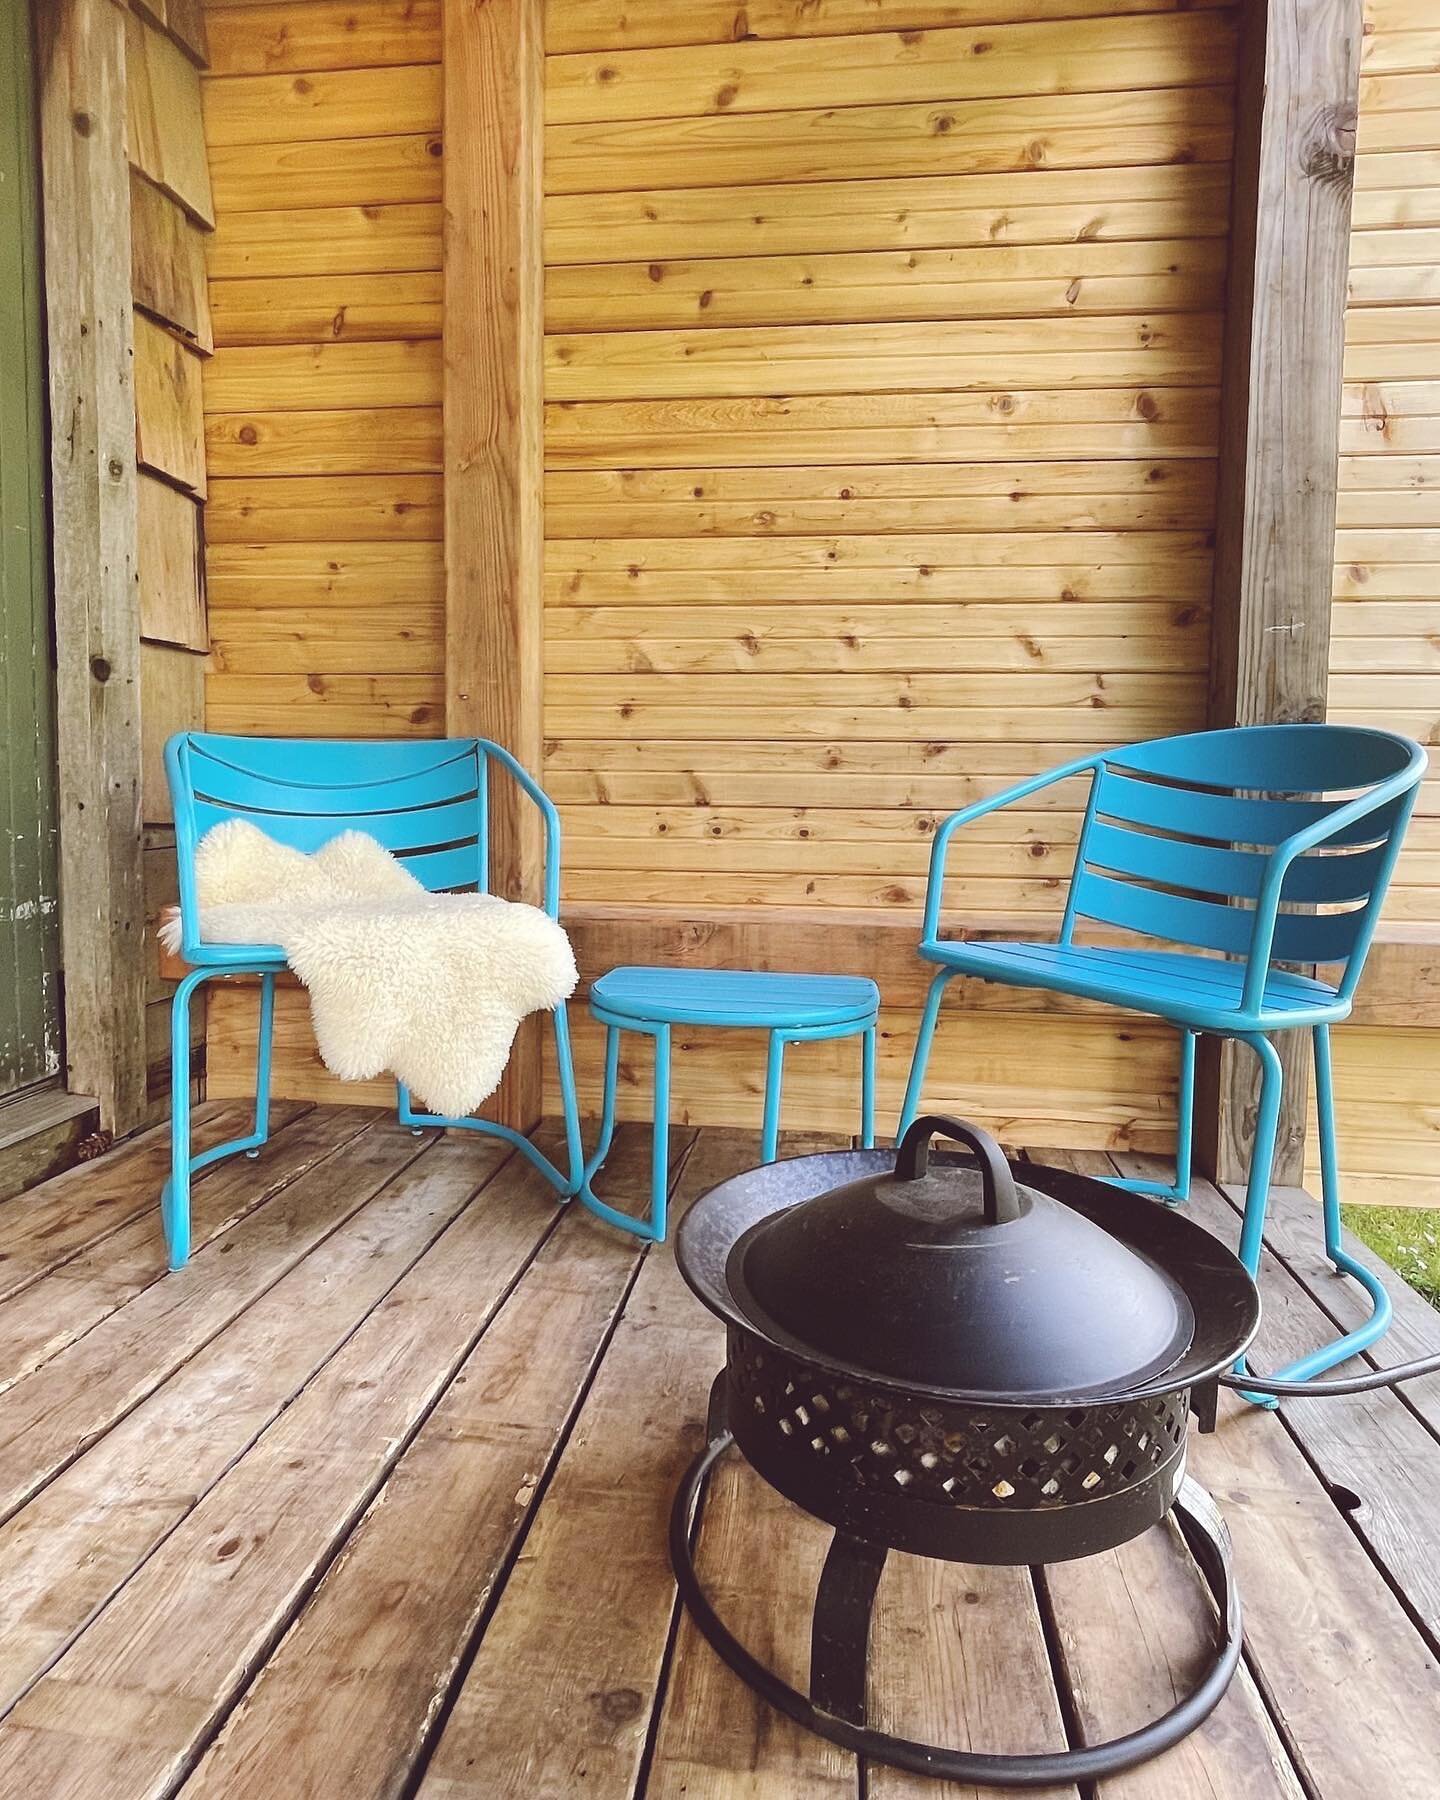 Relaxation points 1 &amp; 2: 
Camping Casita and Studio/Suite last minute Cancellations for both spots this coming weekend! July 7th to 10th! 

#saltspringliving #saltspringisland #islandlife  #gulfislands #campvibes  #experientialtravel #experienceb